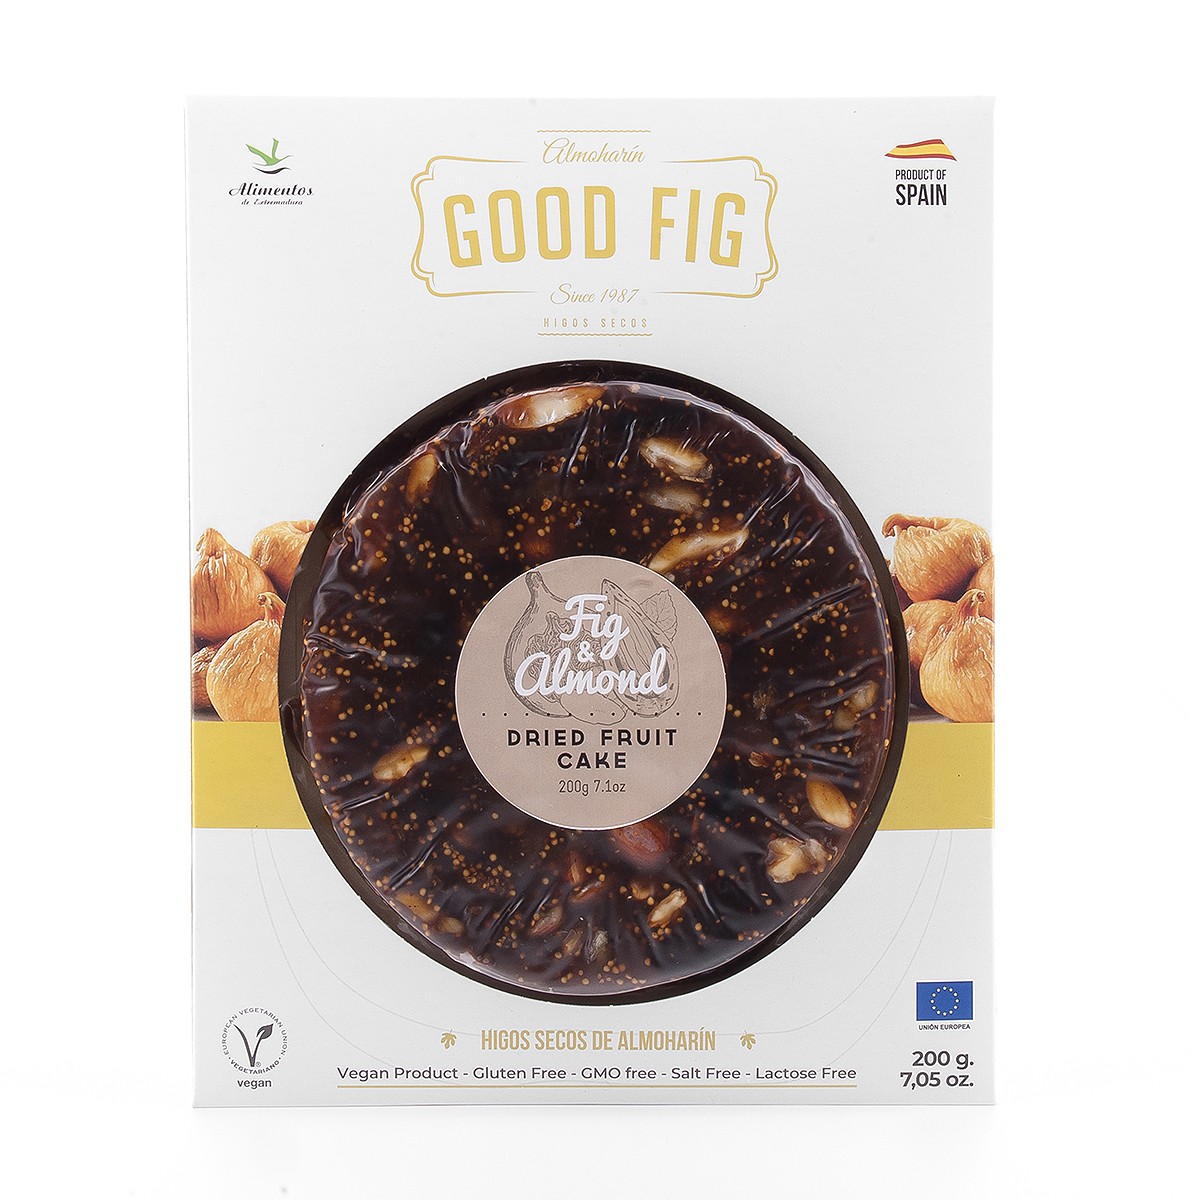 product-of-spain-fig-and-almond